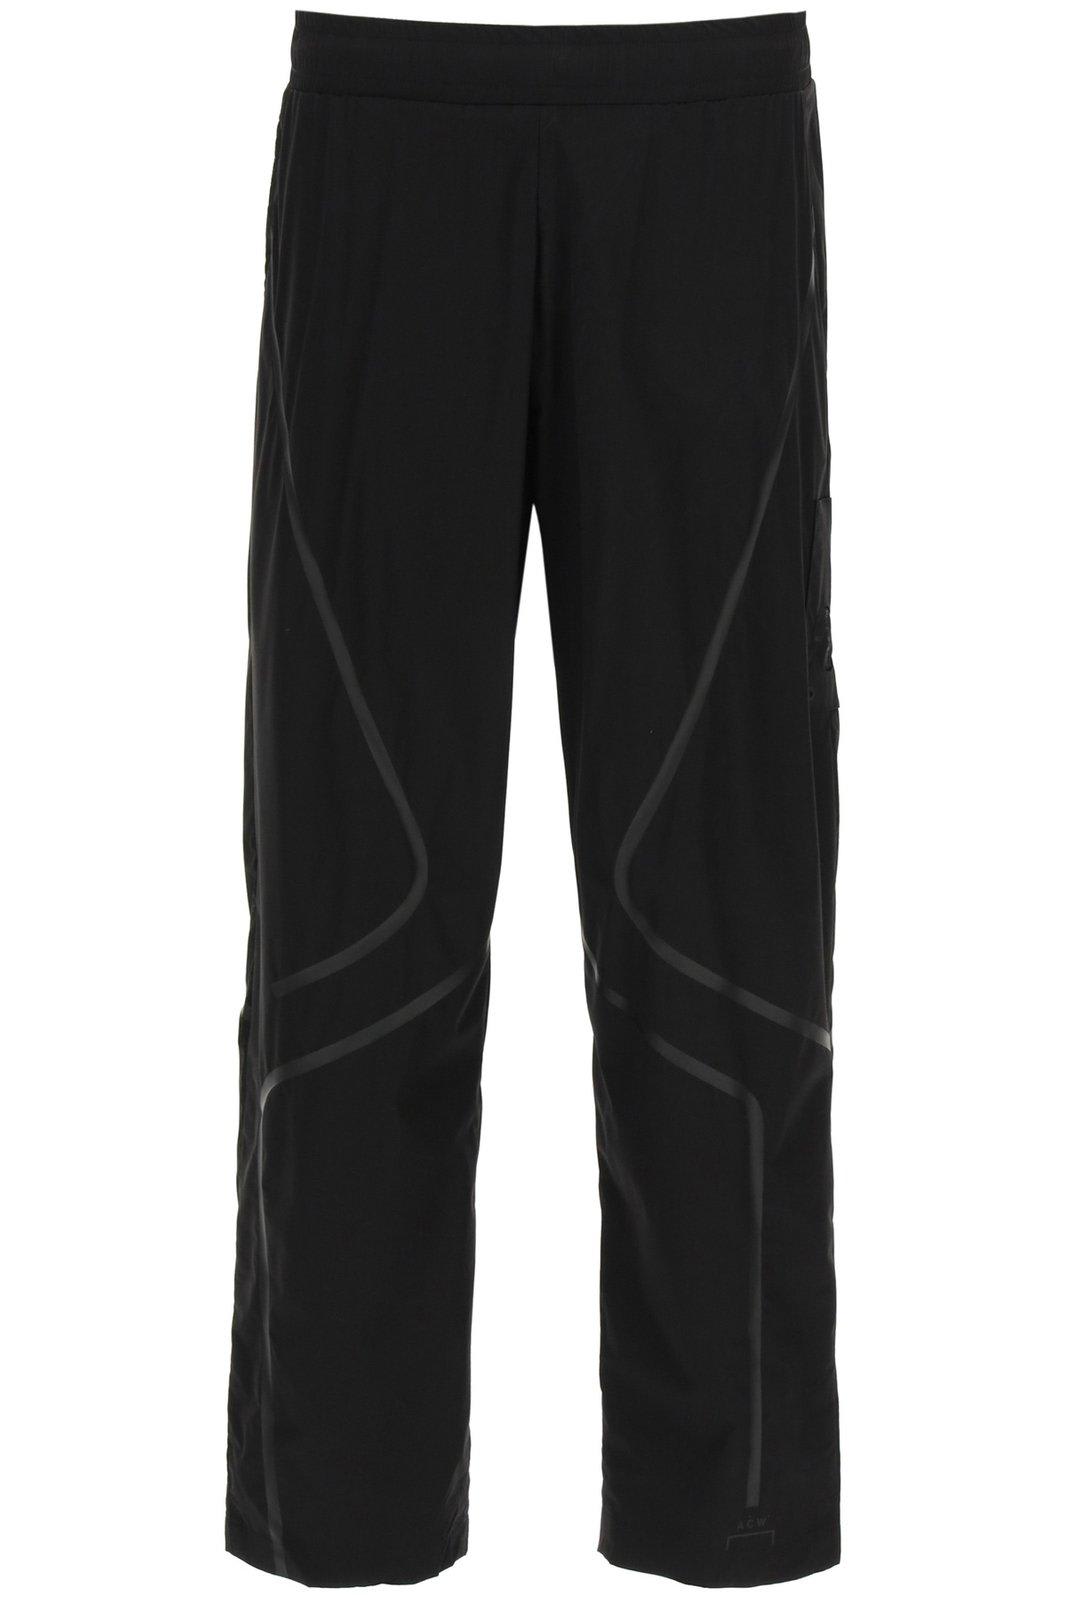 A-COLD-WALL Elasticated Waistband Straight Leg Trousers